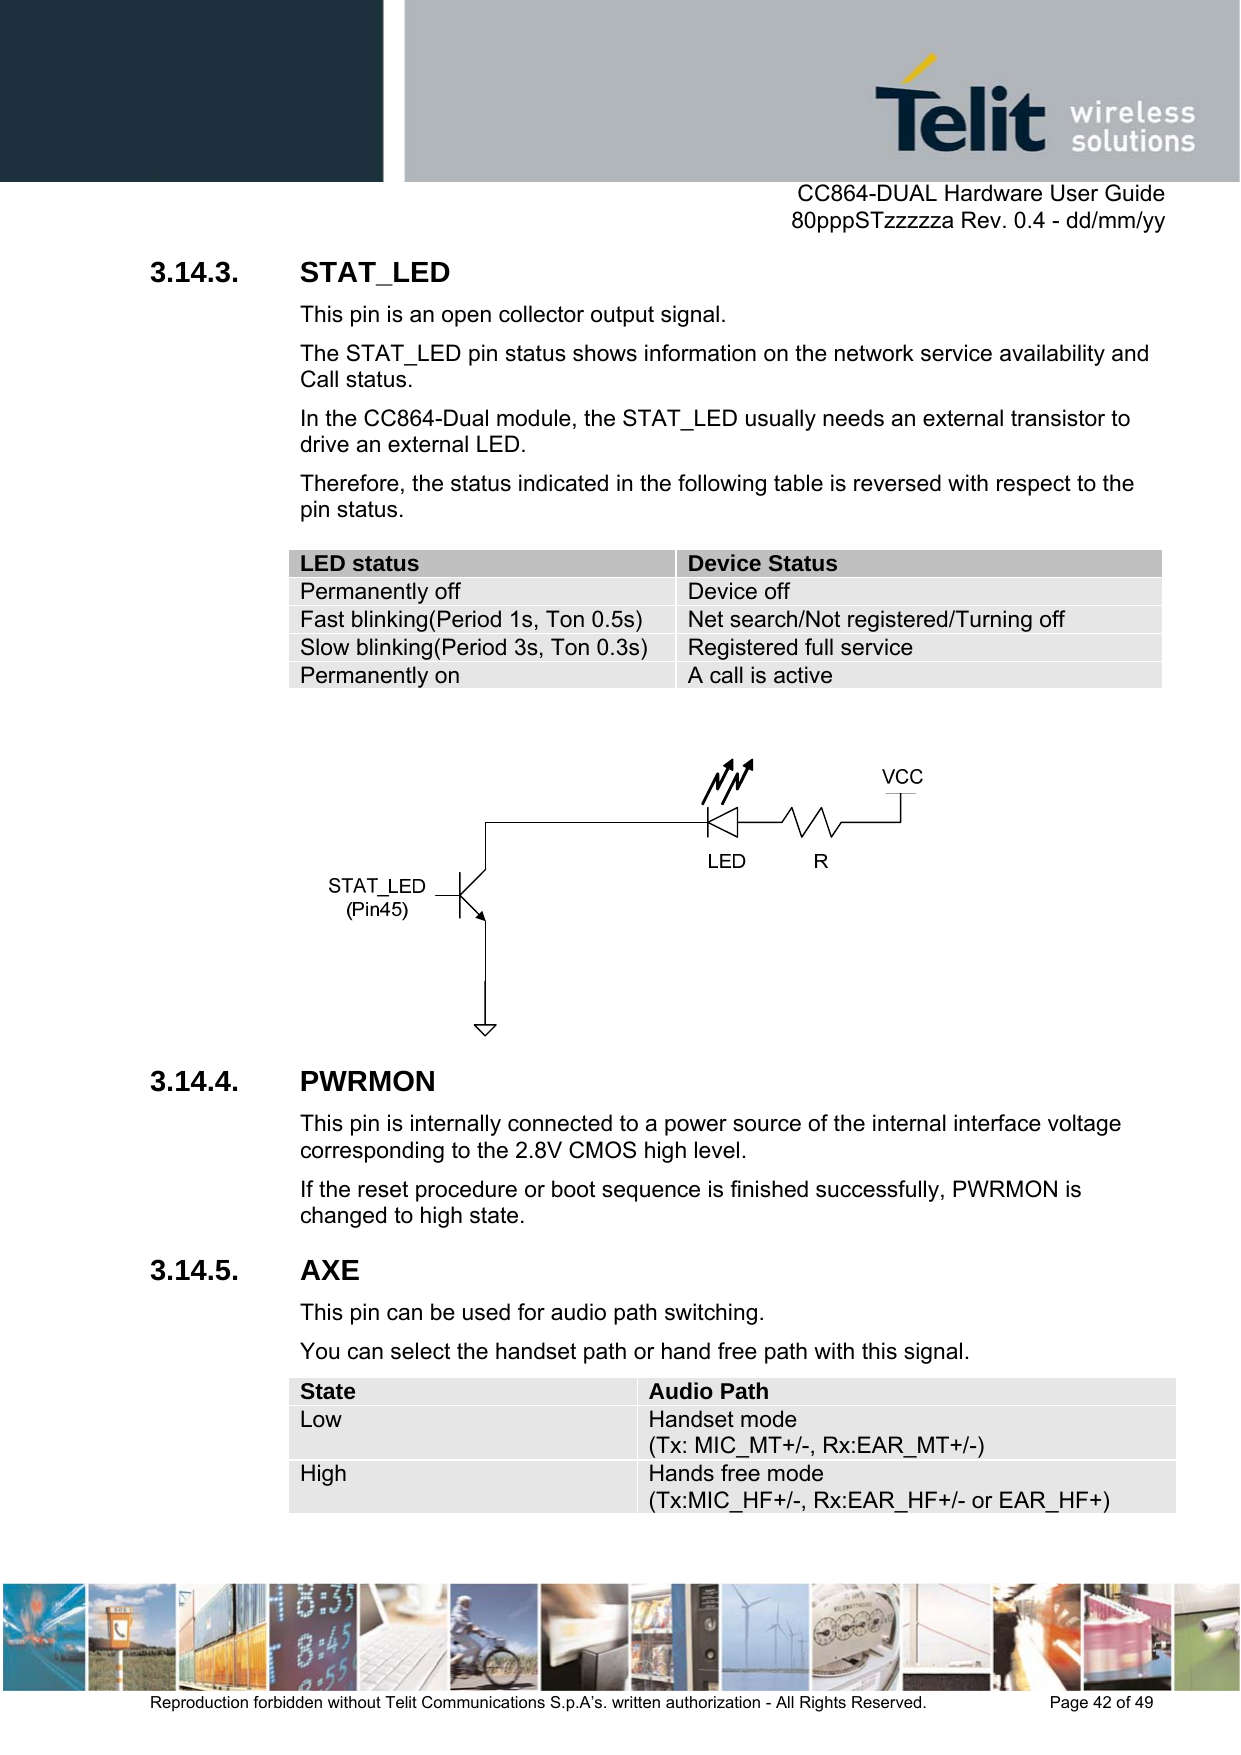      CC864-DUAL Hardware User Guide   80pppSTzzzzza Rev. 0.4 - dd/mm/yy   Reproduction forbidden without Telit Communications S.p.A’s. written authorization - All Rights Reserved.    Page 42 of 49  3.14.3. STAT_LED This pin is an open collector output signal.  The STAT_LED pin status shows information on the network service availability and Call status.  In the CC864-Dual module, the STAT_LED usually needs an external transistor to drive an external LED. Therefore, the status indicated in the following table is reversed with respect to the pin status.   LED status  Device Status Permanently off  Device off Fast blinking(Period 1s, Ton 0.5s)  Net search/Not registered/Turning off Slow blinking(Period 3s, Ton 0.3s)  Registered full service Permanently on  A call is active   3.14.4. PWRMON This pin is internally connected to a power source of the internal interface voltage corresponding to the 2.8V CMOS high level.  If the reset procedure or boot sequence is finished successfully, PWRMON is changed to high state. 3.14.5. AXE This pin can be used for audio path switching.  You can select the handset path or hand free path with this signal. State  Audio Path Low  Handset mode (Tx: MIC_MT+/-, Rx:EAR_MT+/-) High  Hands free mode (Tx:MIC_HF+/-, Rx:EAR_HF+/- or EAR_HF+)  